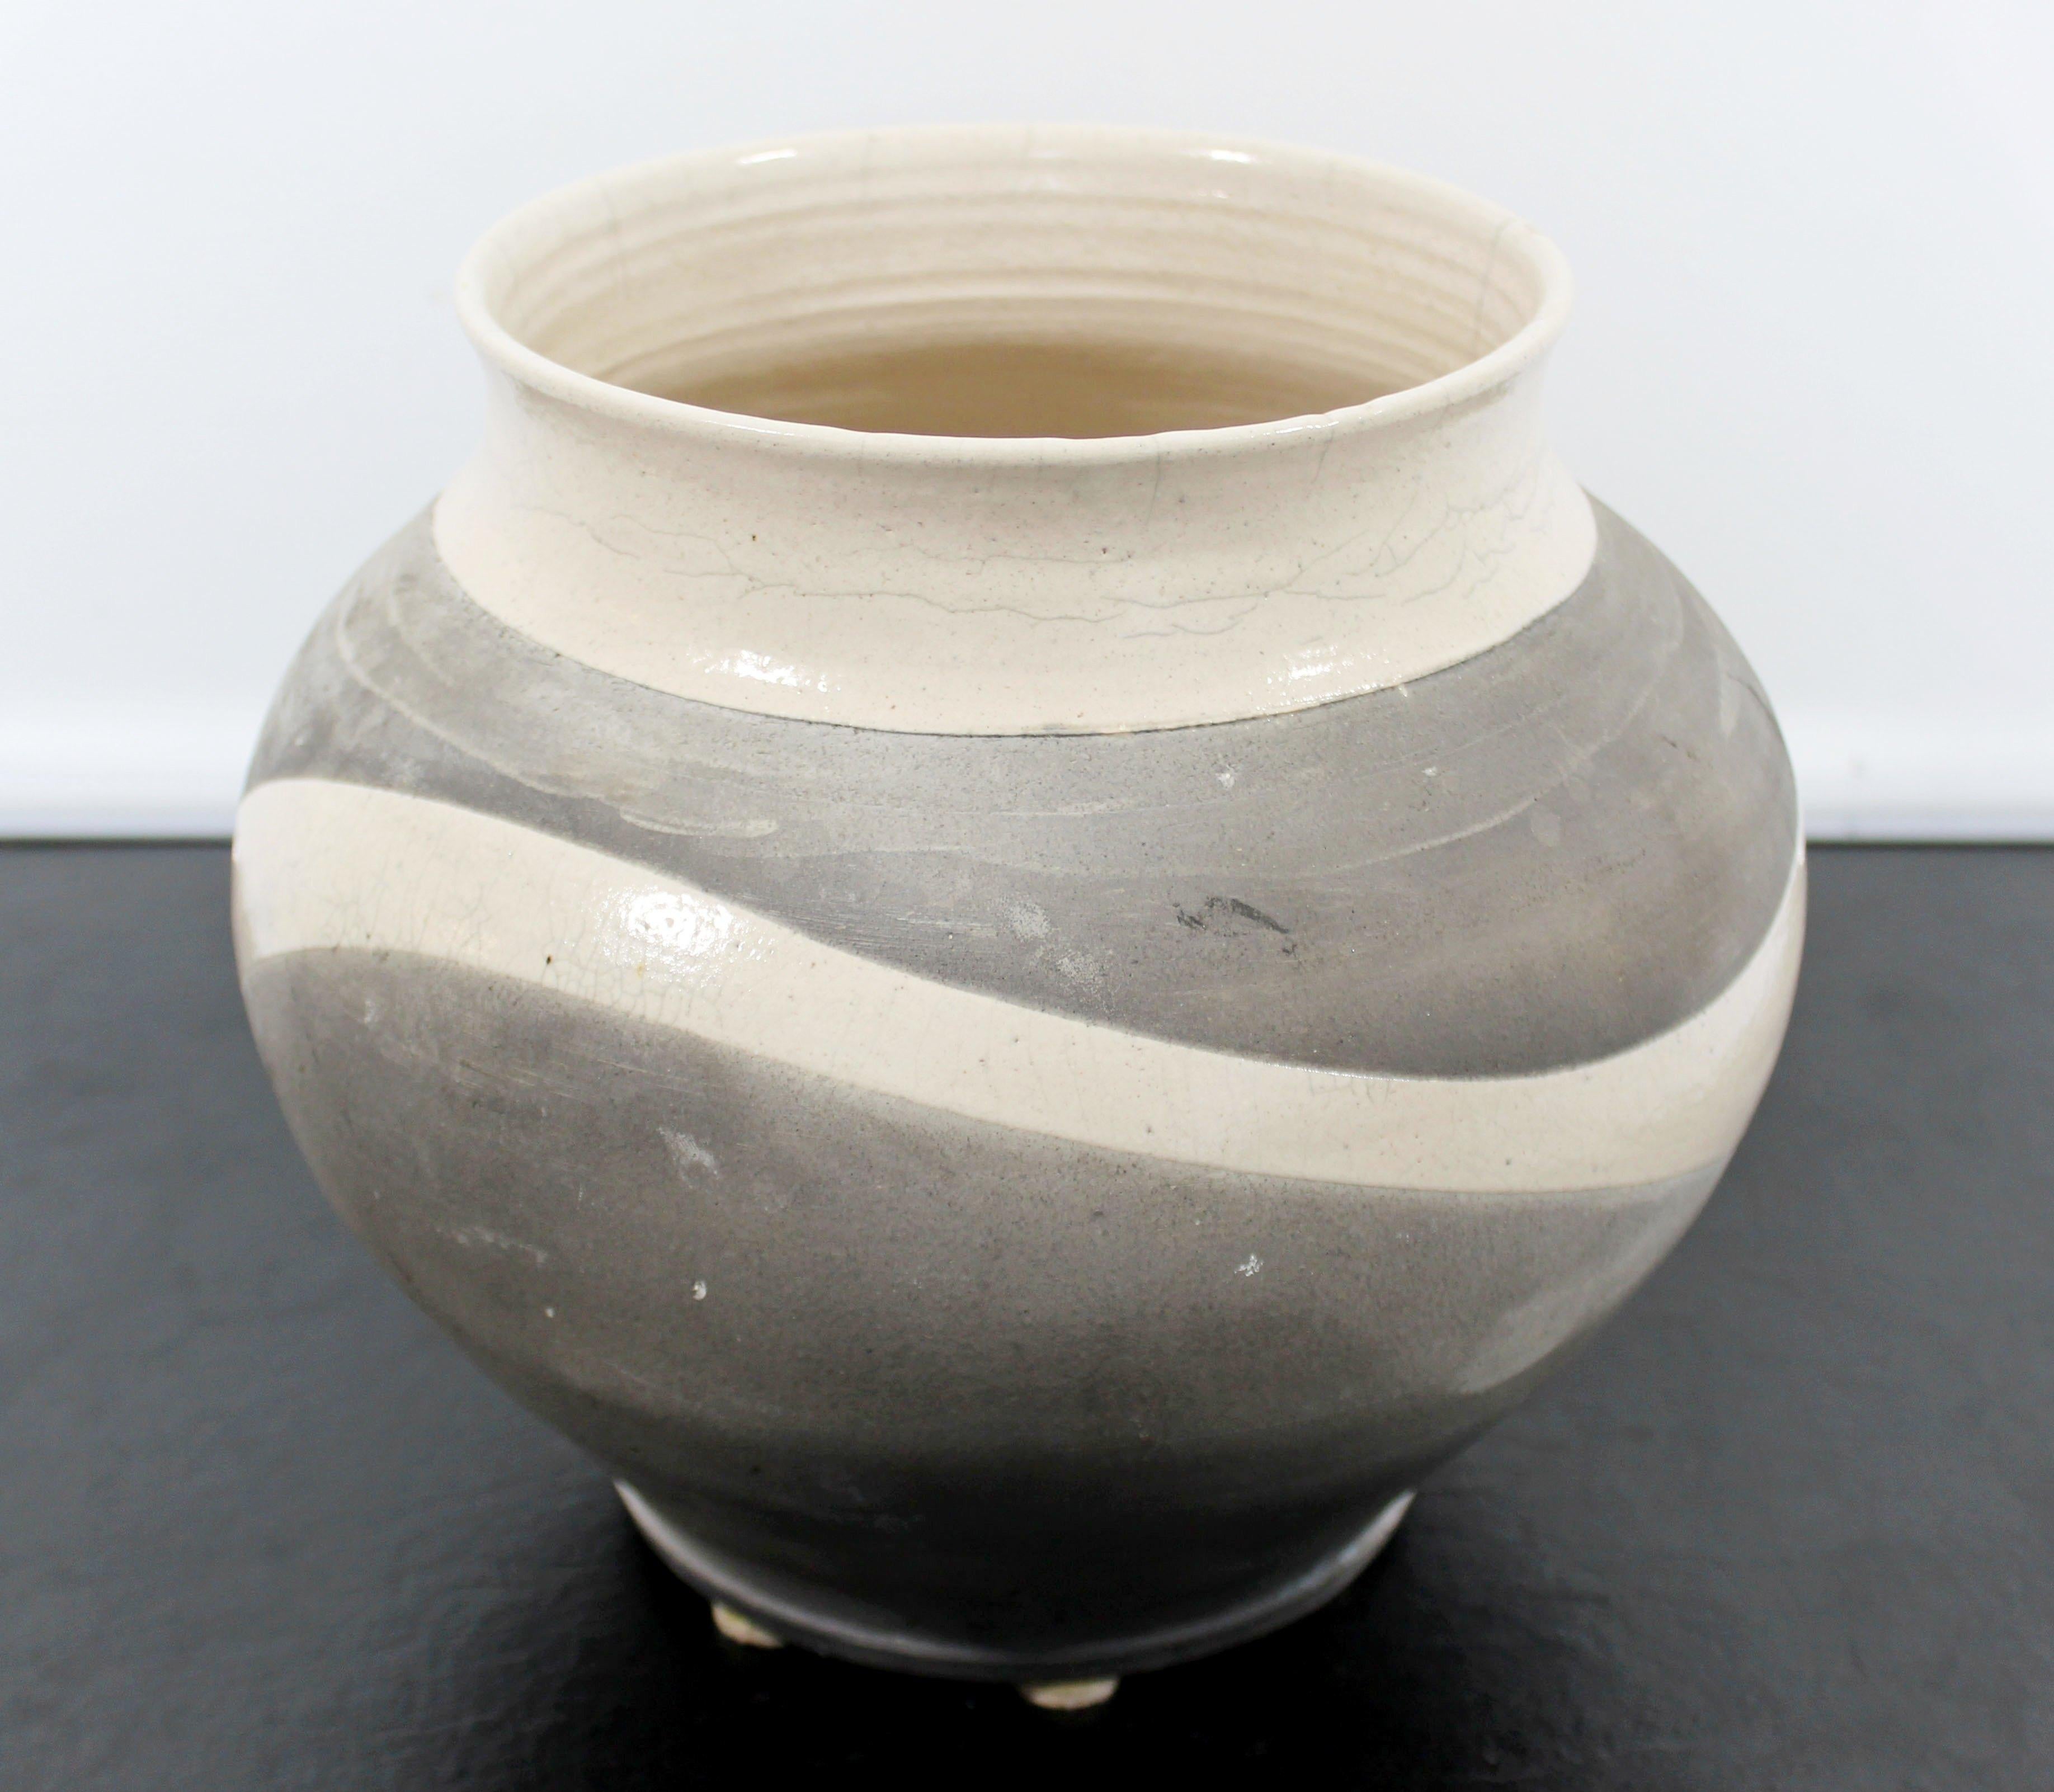 For your consideration is a marvelous, Raku ceramic piece, signed and dated on the bottom by Robert Kidd, 1986. Except for a production fracture on top opening the piece is in excellent condition. The dimensions are 11